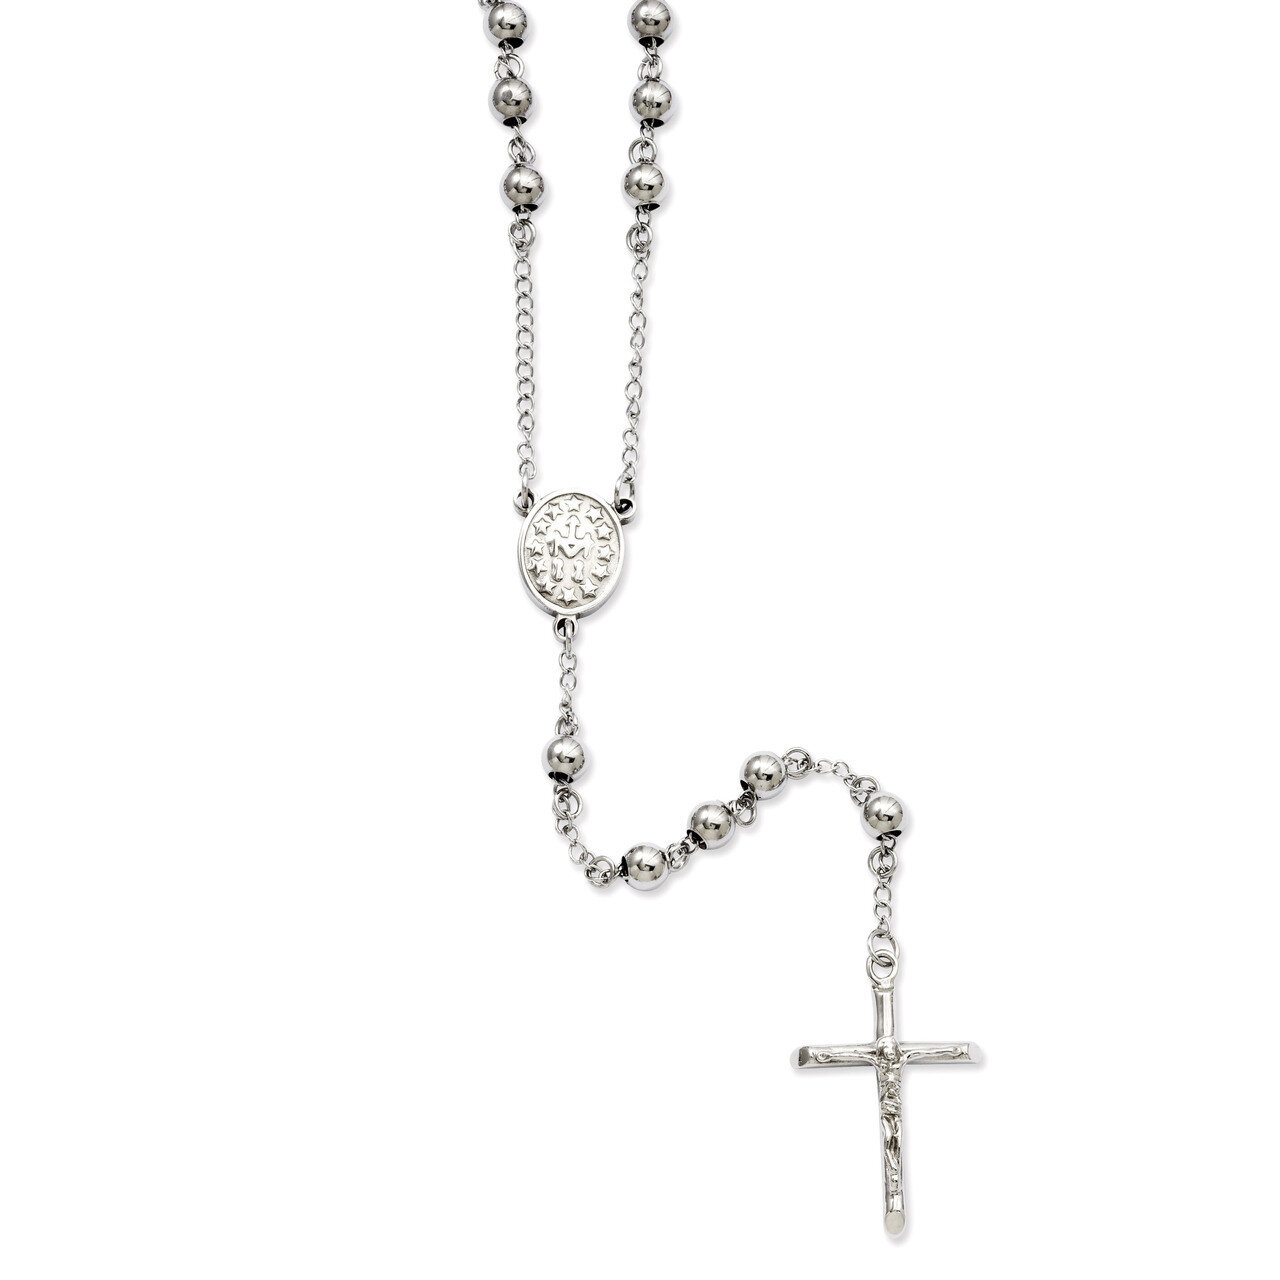 6mm Bead Rosary Necklace - Stainless Steel SRN809